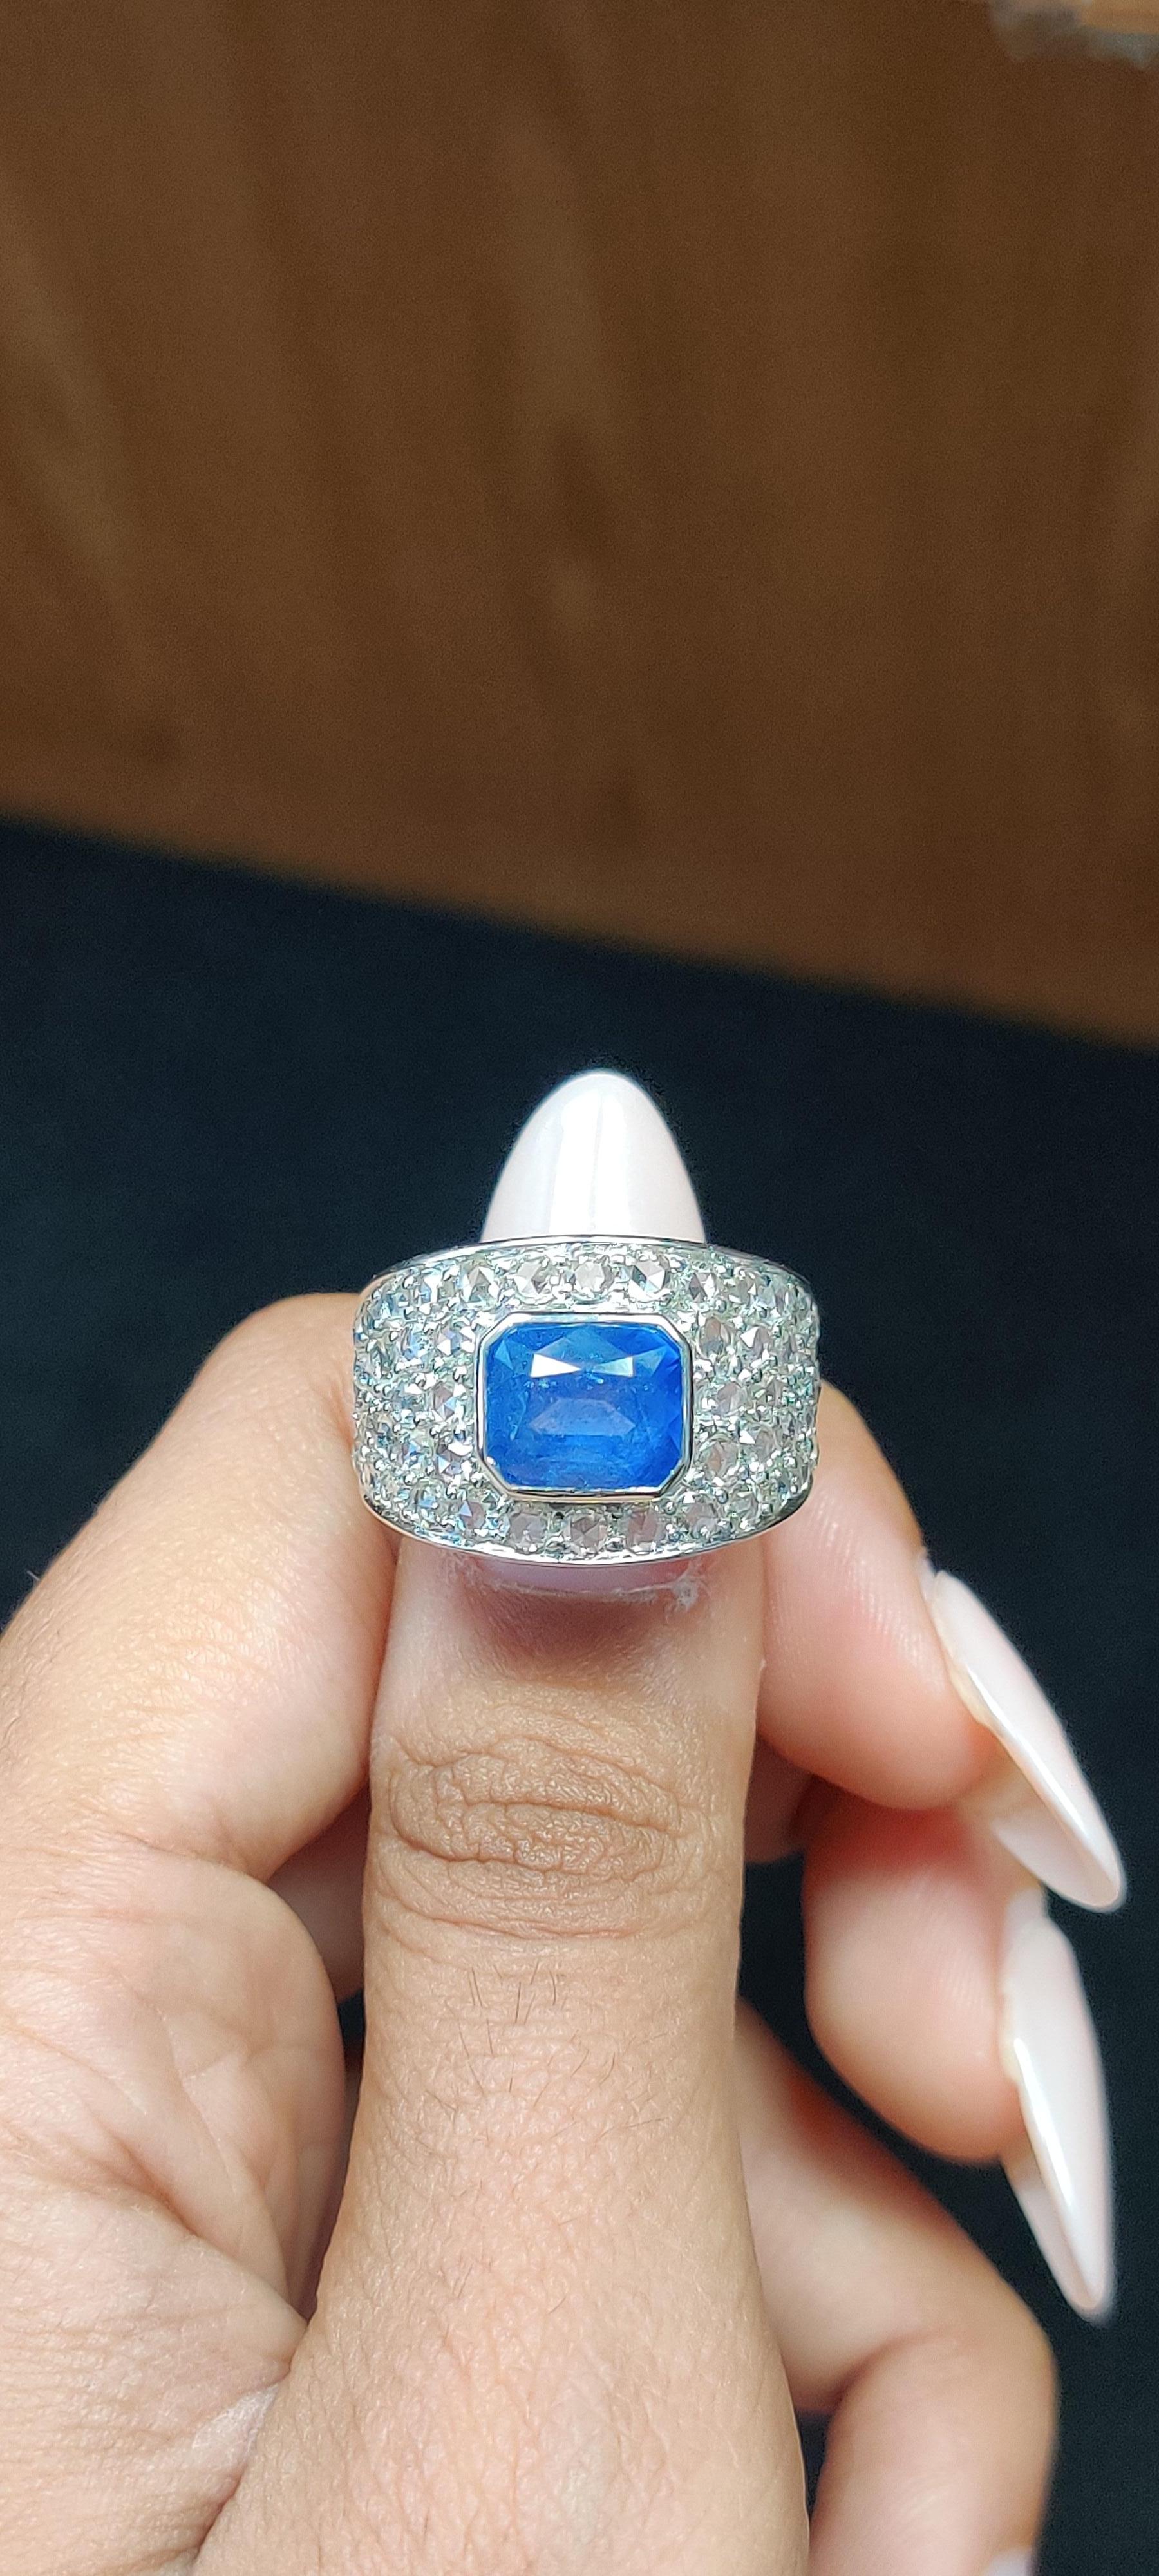 Victorian Men's 3.56 Carat Ceylon Sapphire Ring with Rose Cut Diamonds in 14k White Gold  For Sale